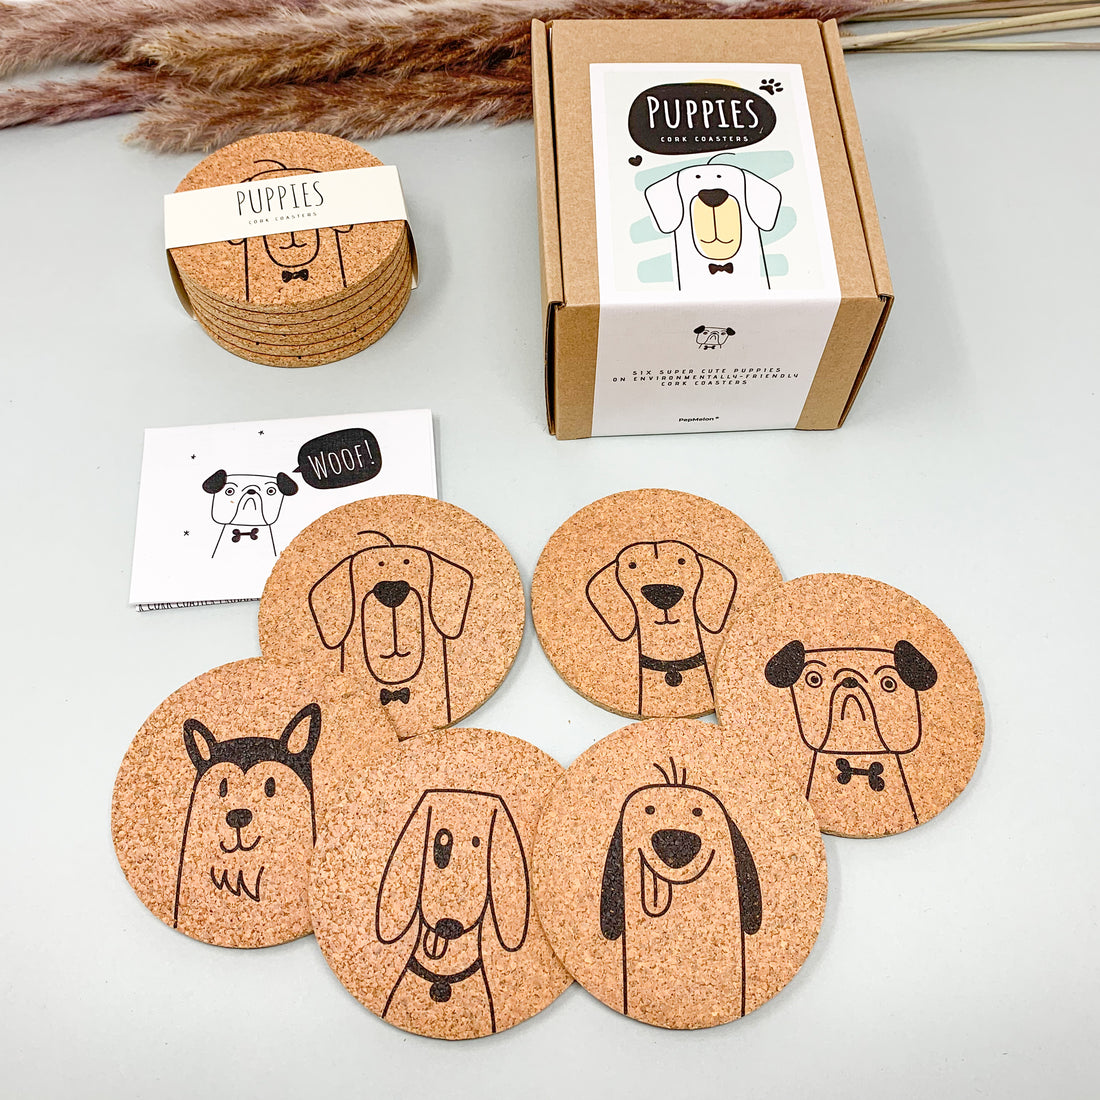 Puppies cork coaster set, cute dogs dog lovers dog owners gift